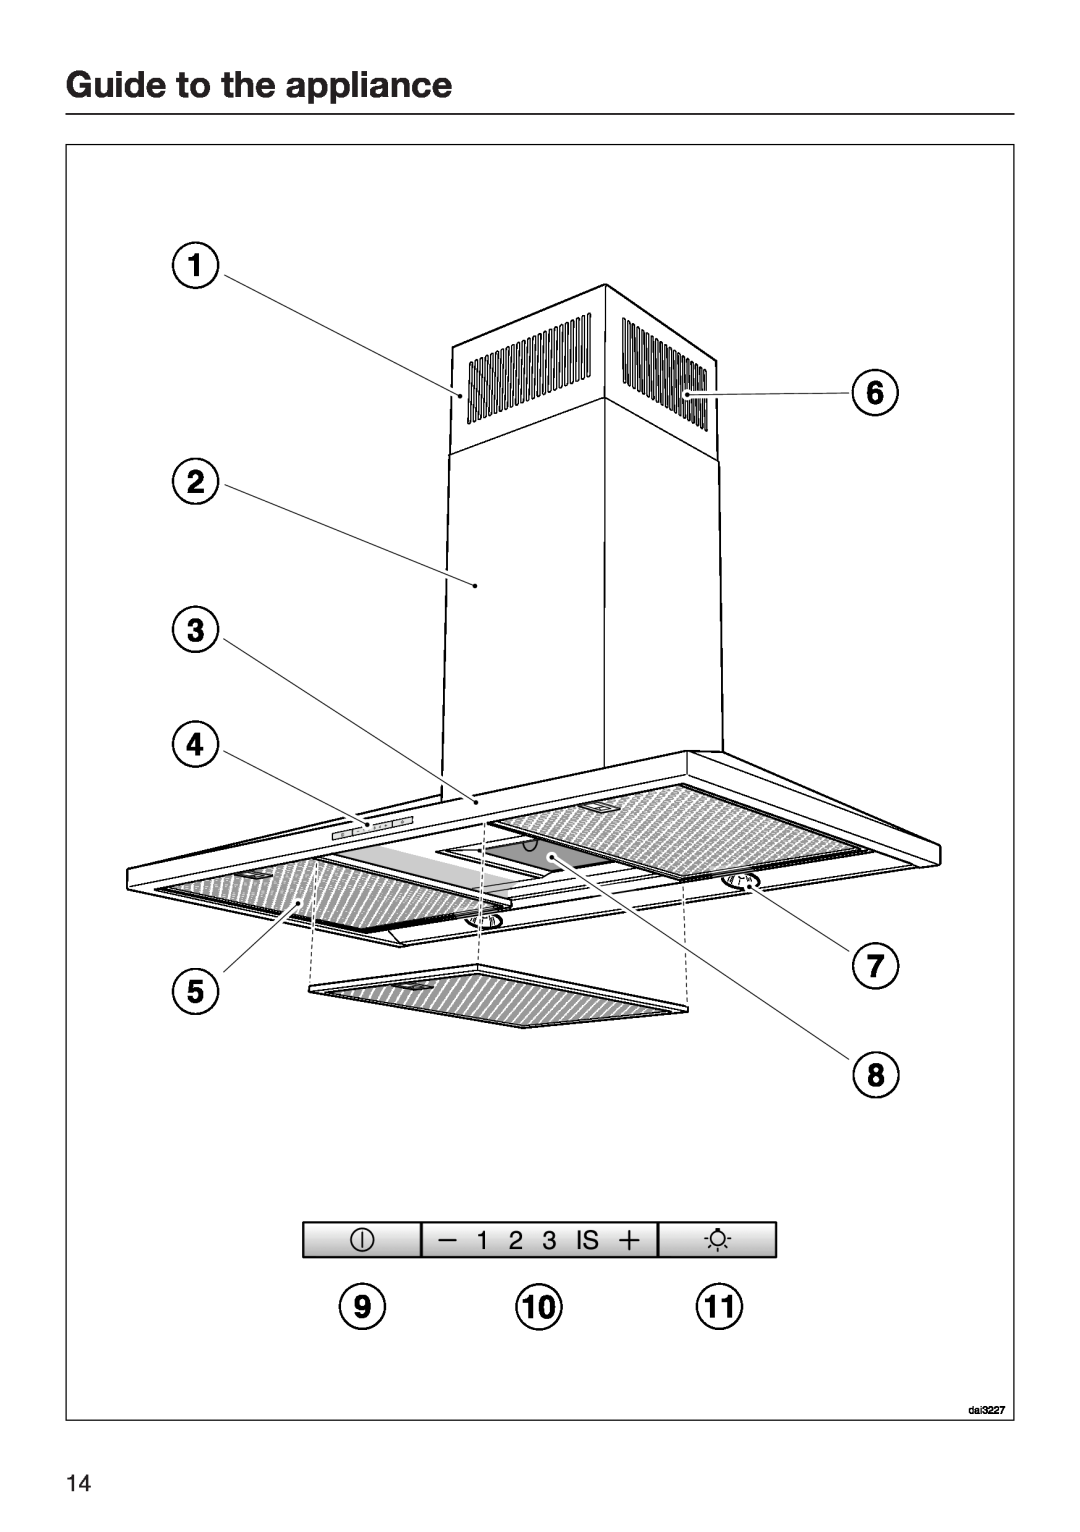 Miele 09 968 240 installation instructions Guide to the appliance 